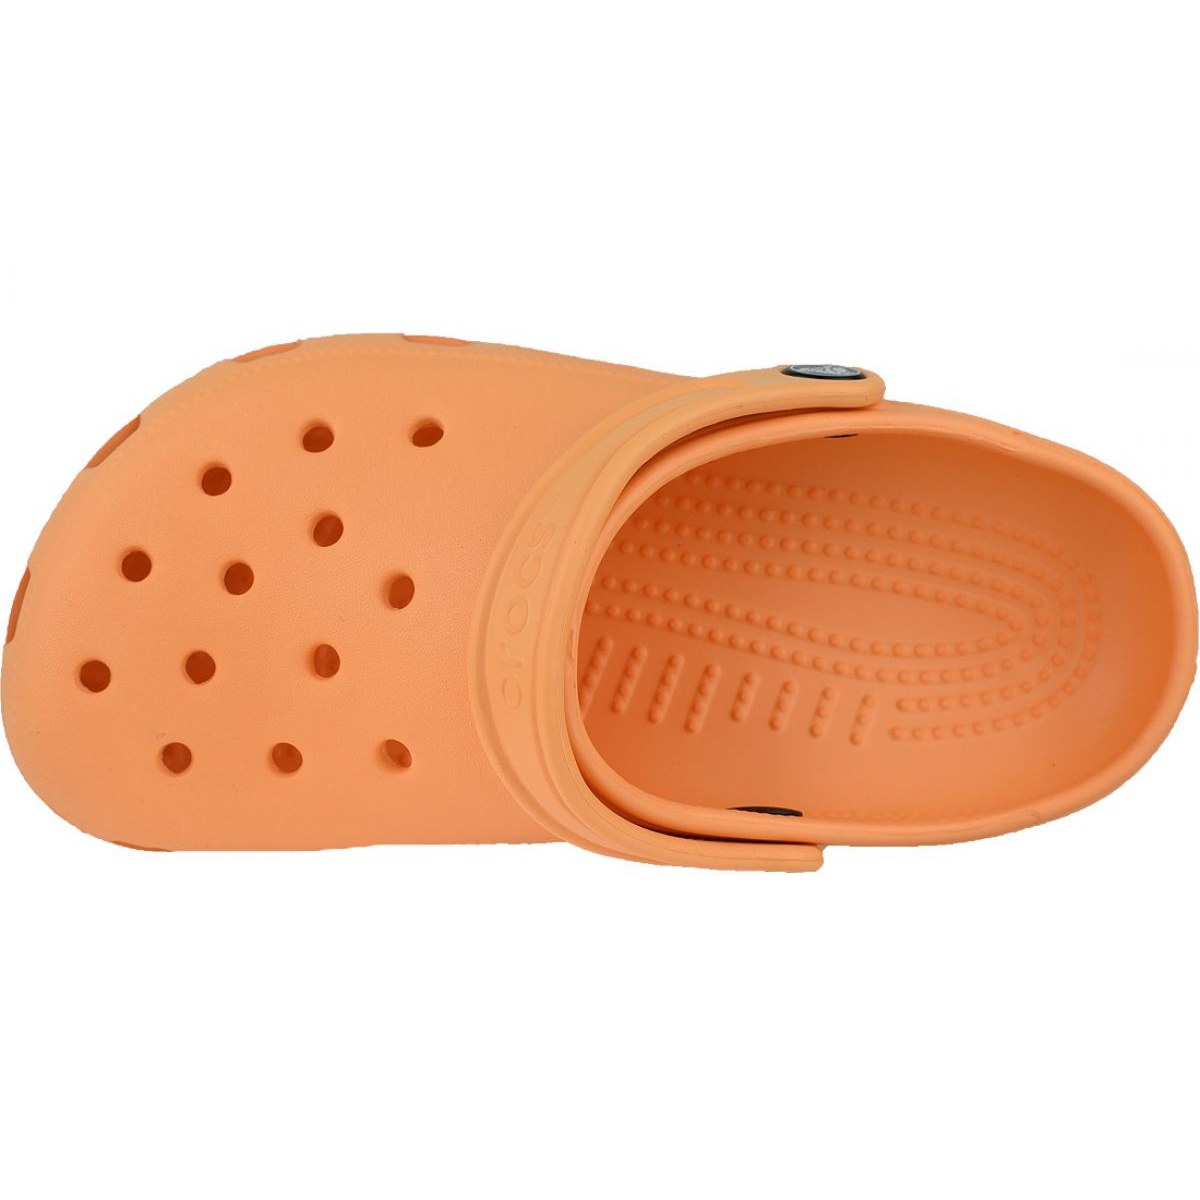 croc sale 2 for 45